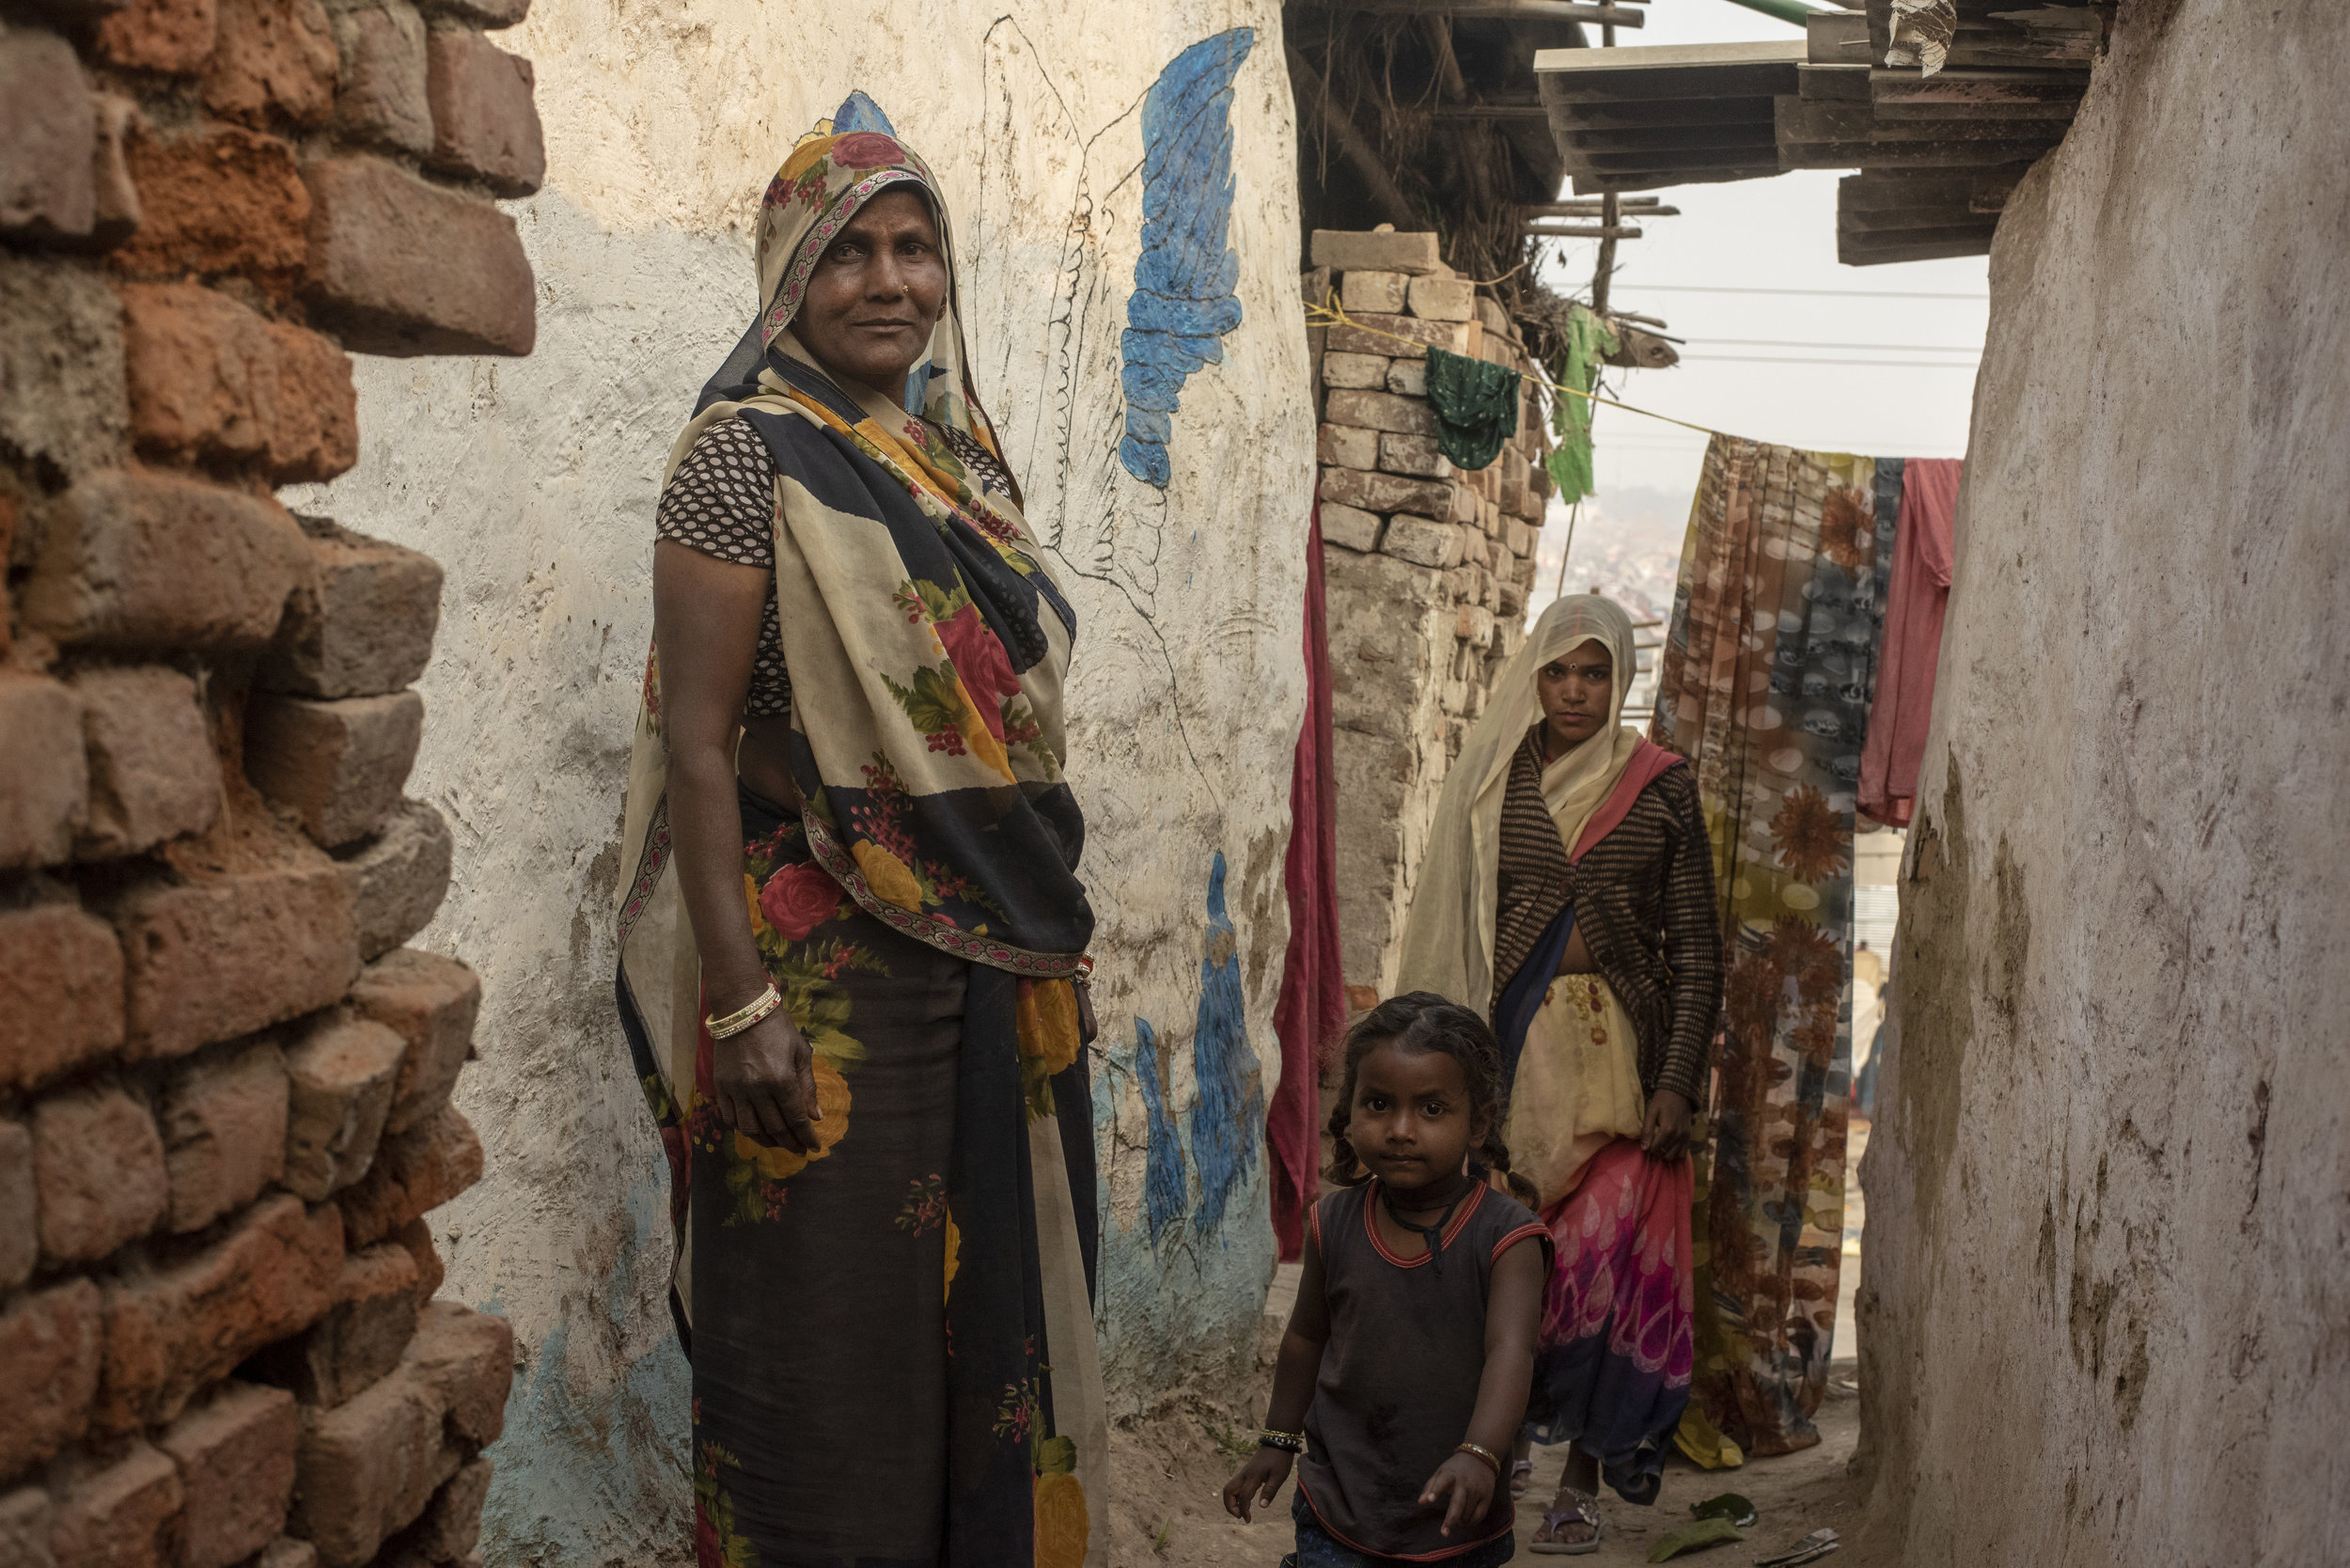  Vimla, age 60, has lived on the outskirts of the mela with her children and grand children for 3 generations. 